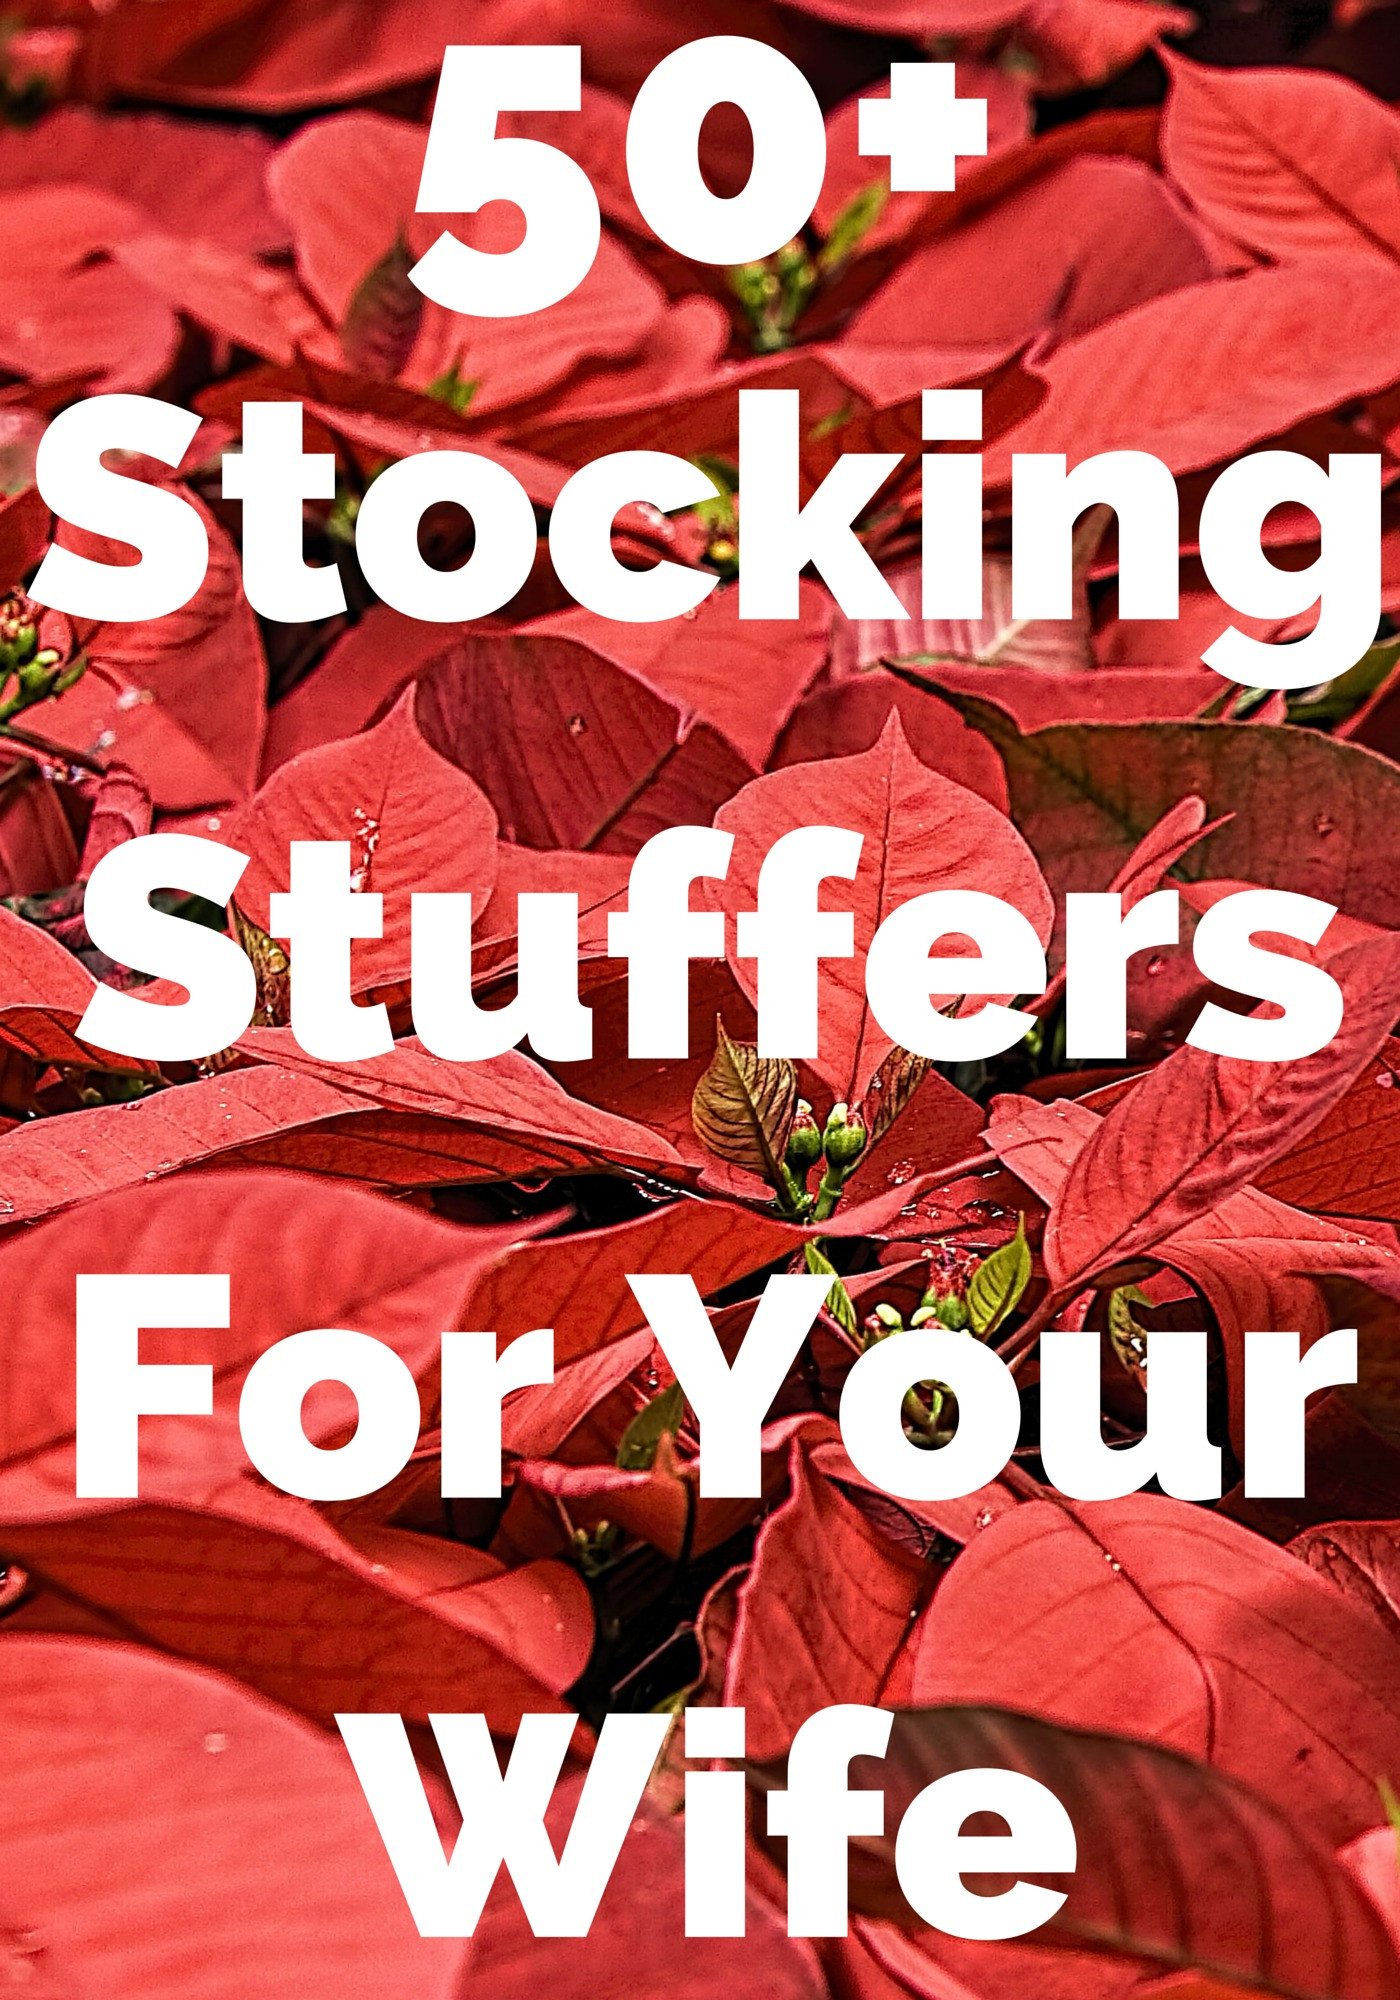 12 Days Of Christmas Gift Ideas For Her
 Best 50 Stocking Stuffers for Your Wife